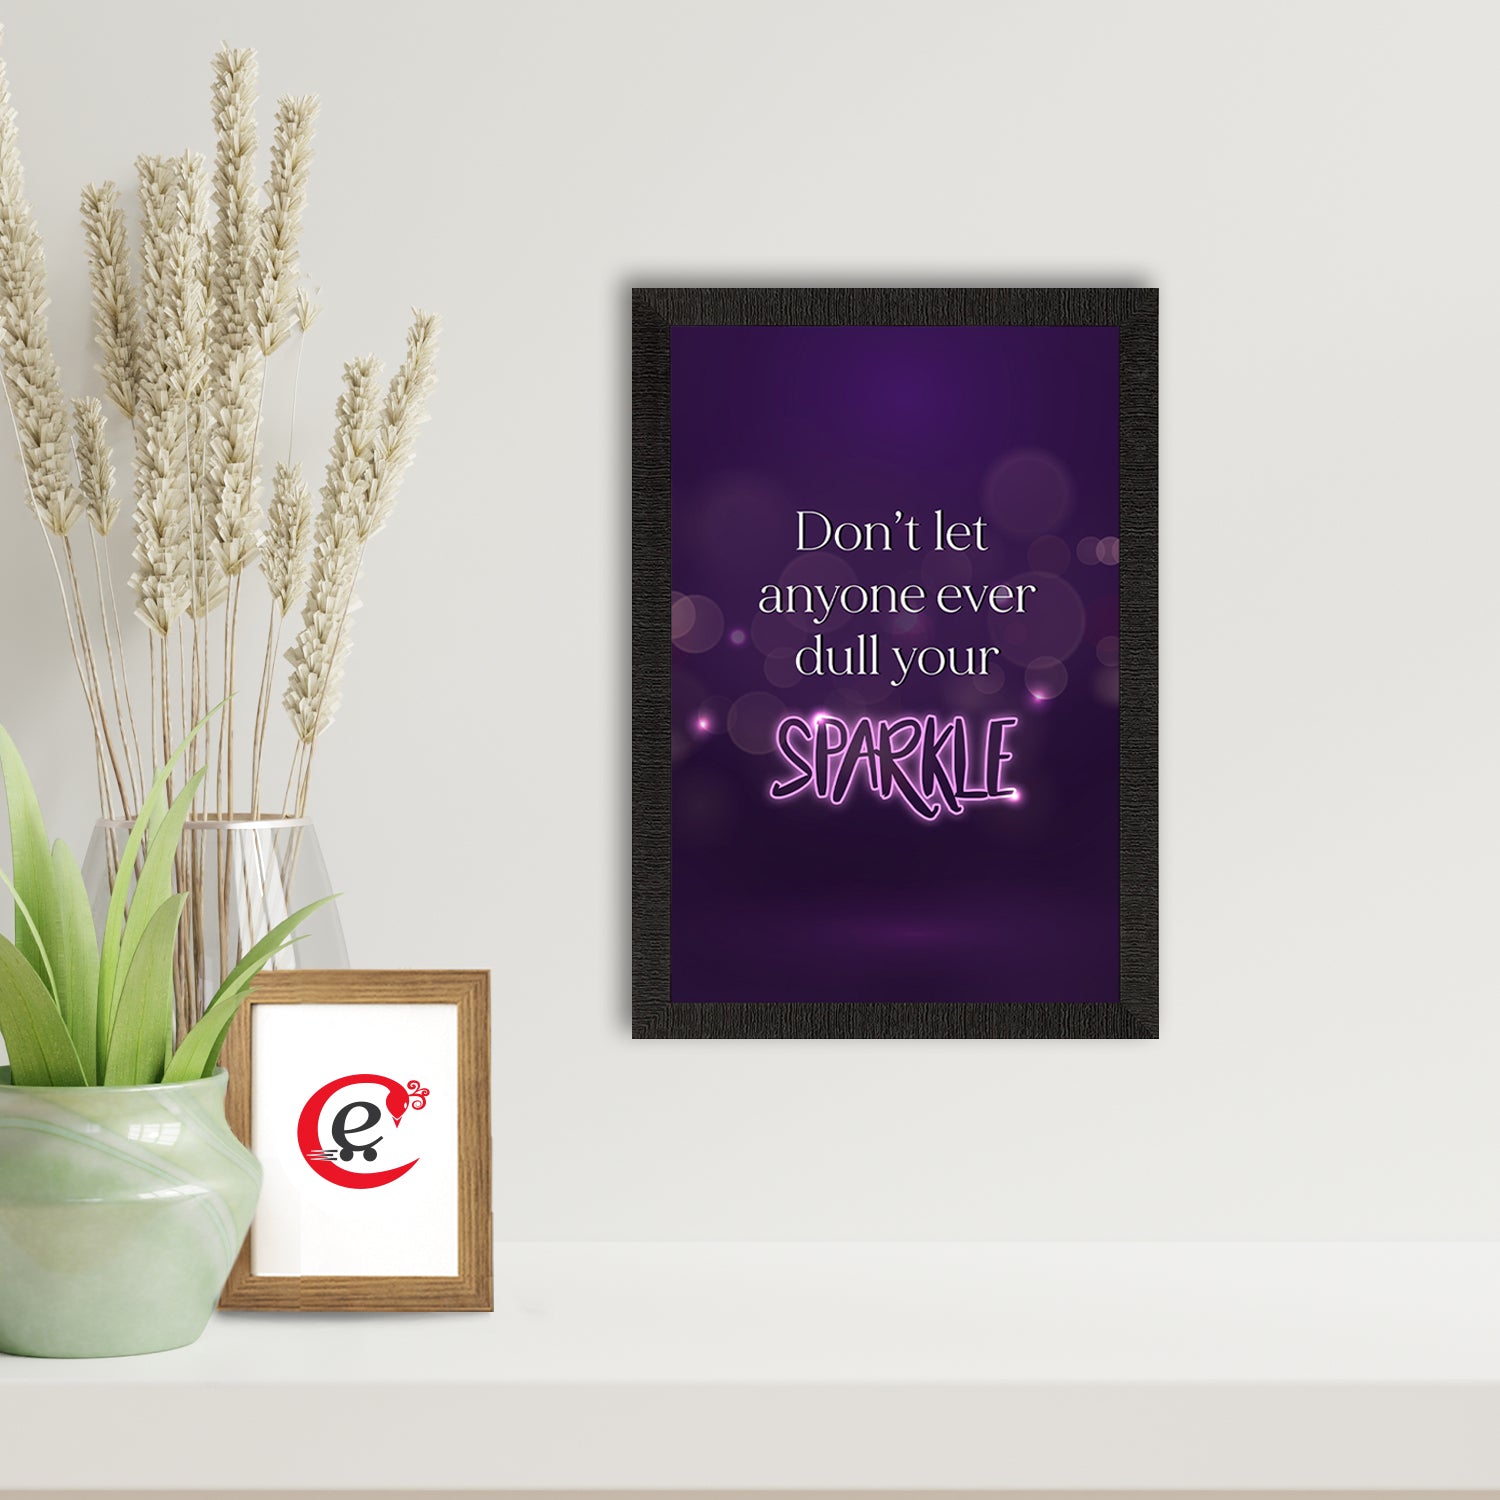 "Don't let anyone ever dull your Sparkle" Motivational Quote Satin Matt Texture UV Art Painting 1